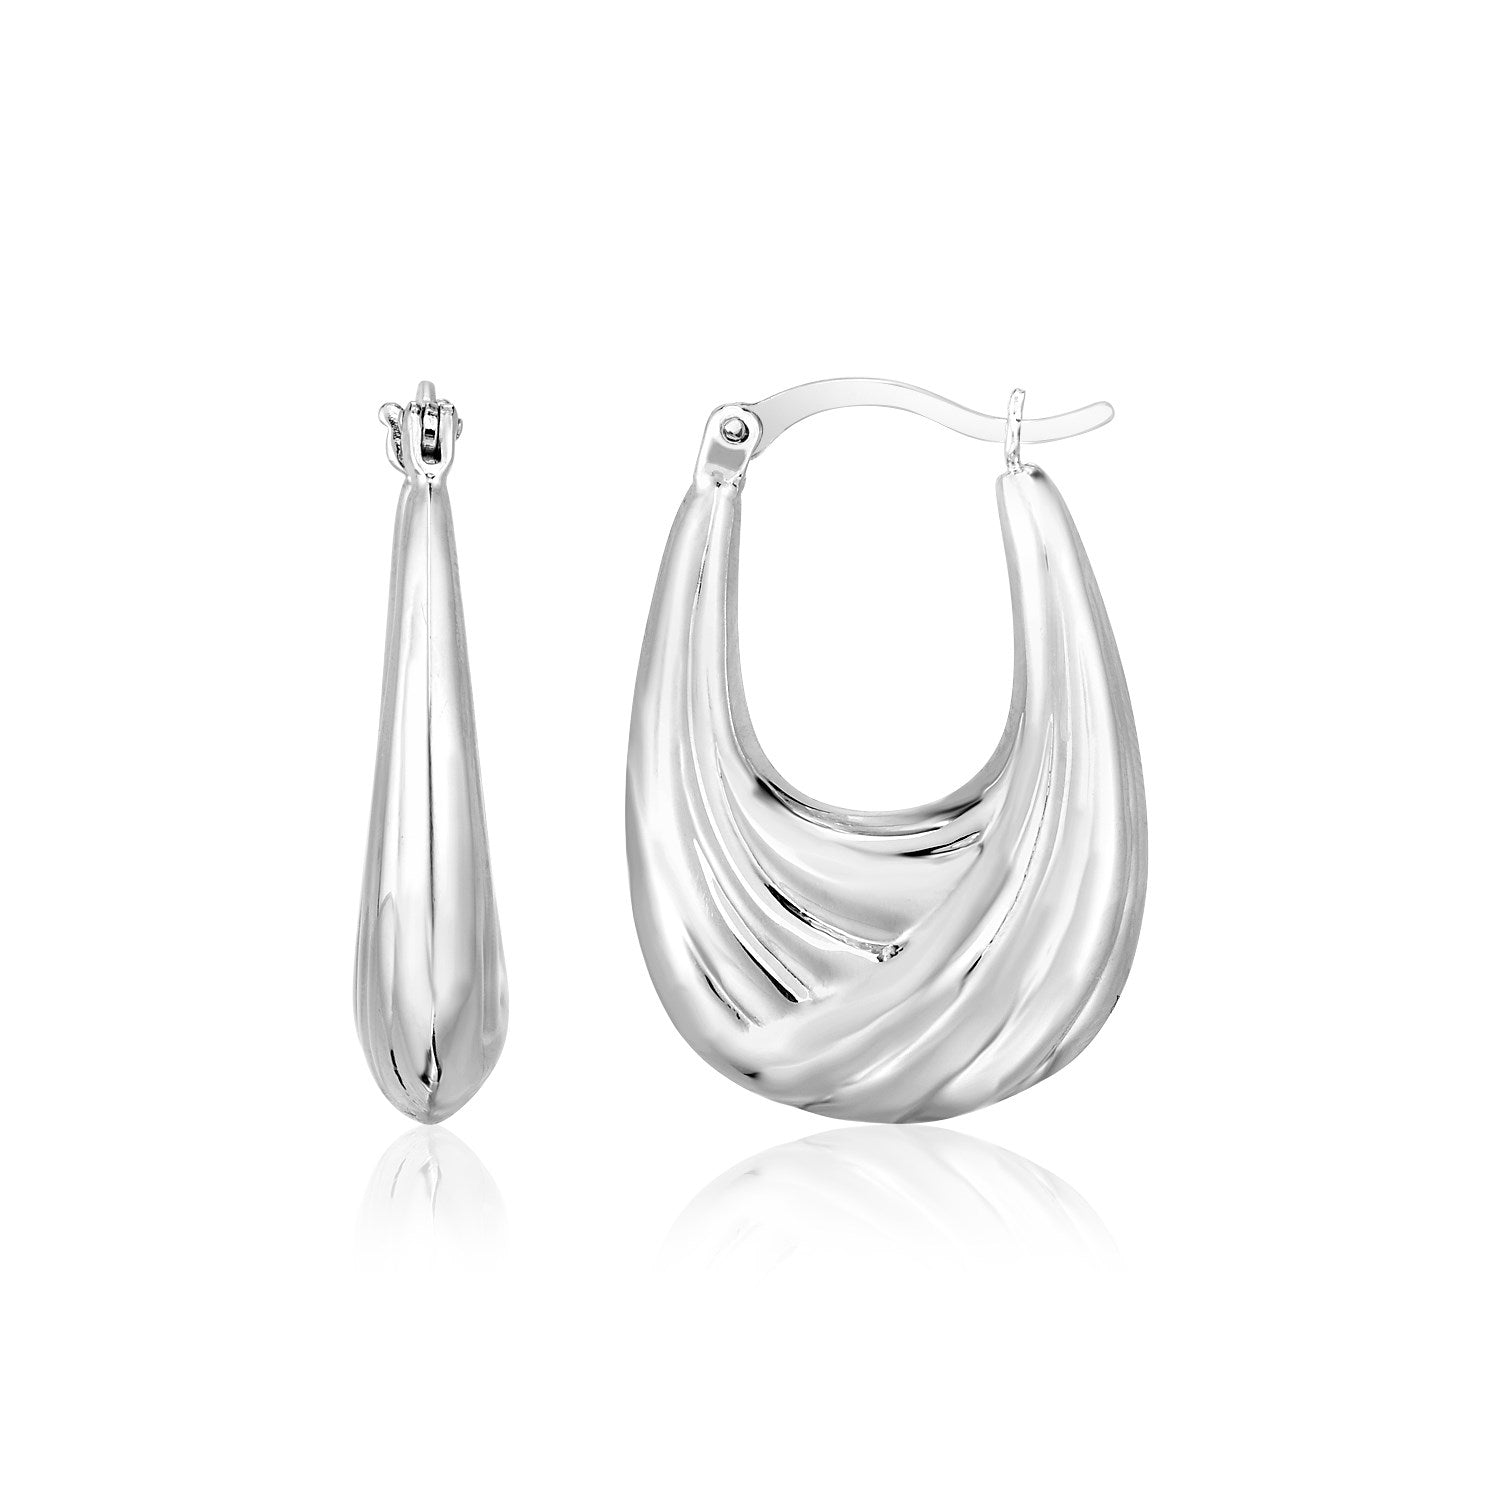 Sterling Silver Polished Puffed Hoop Earrings with Drapery Texture